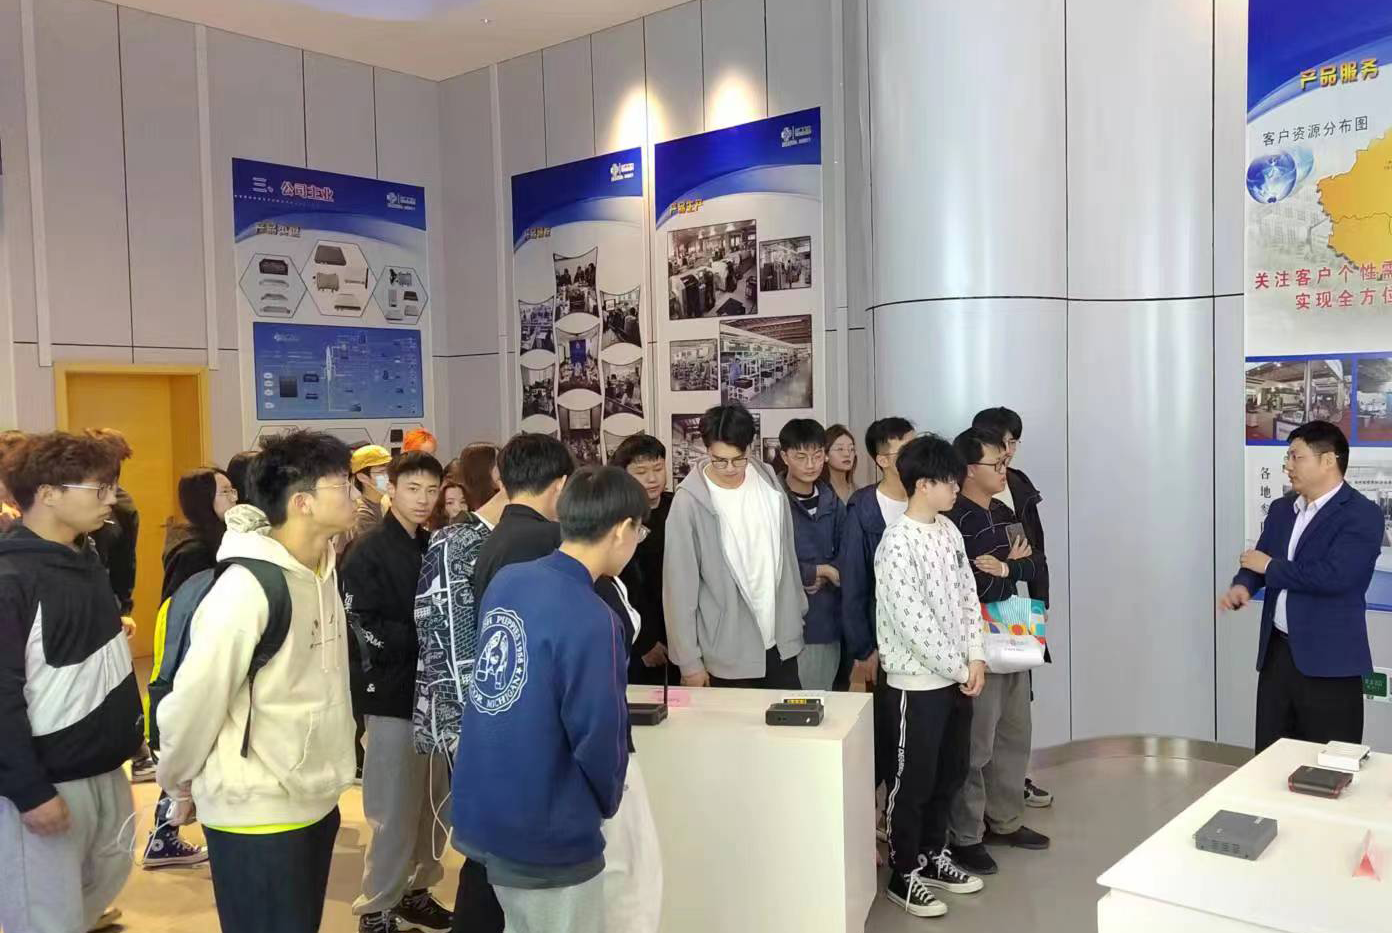 Students of Changshu Institute of Technology Visit Yitong Technology